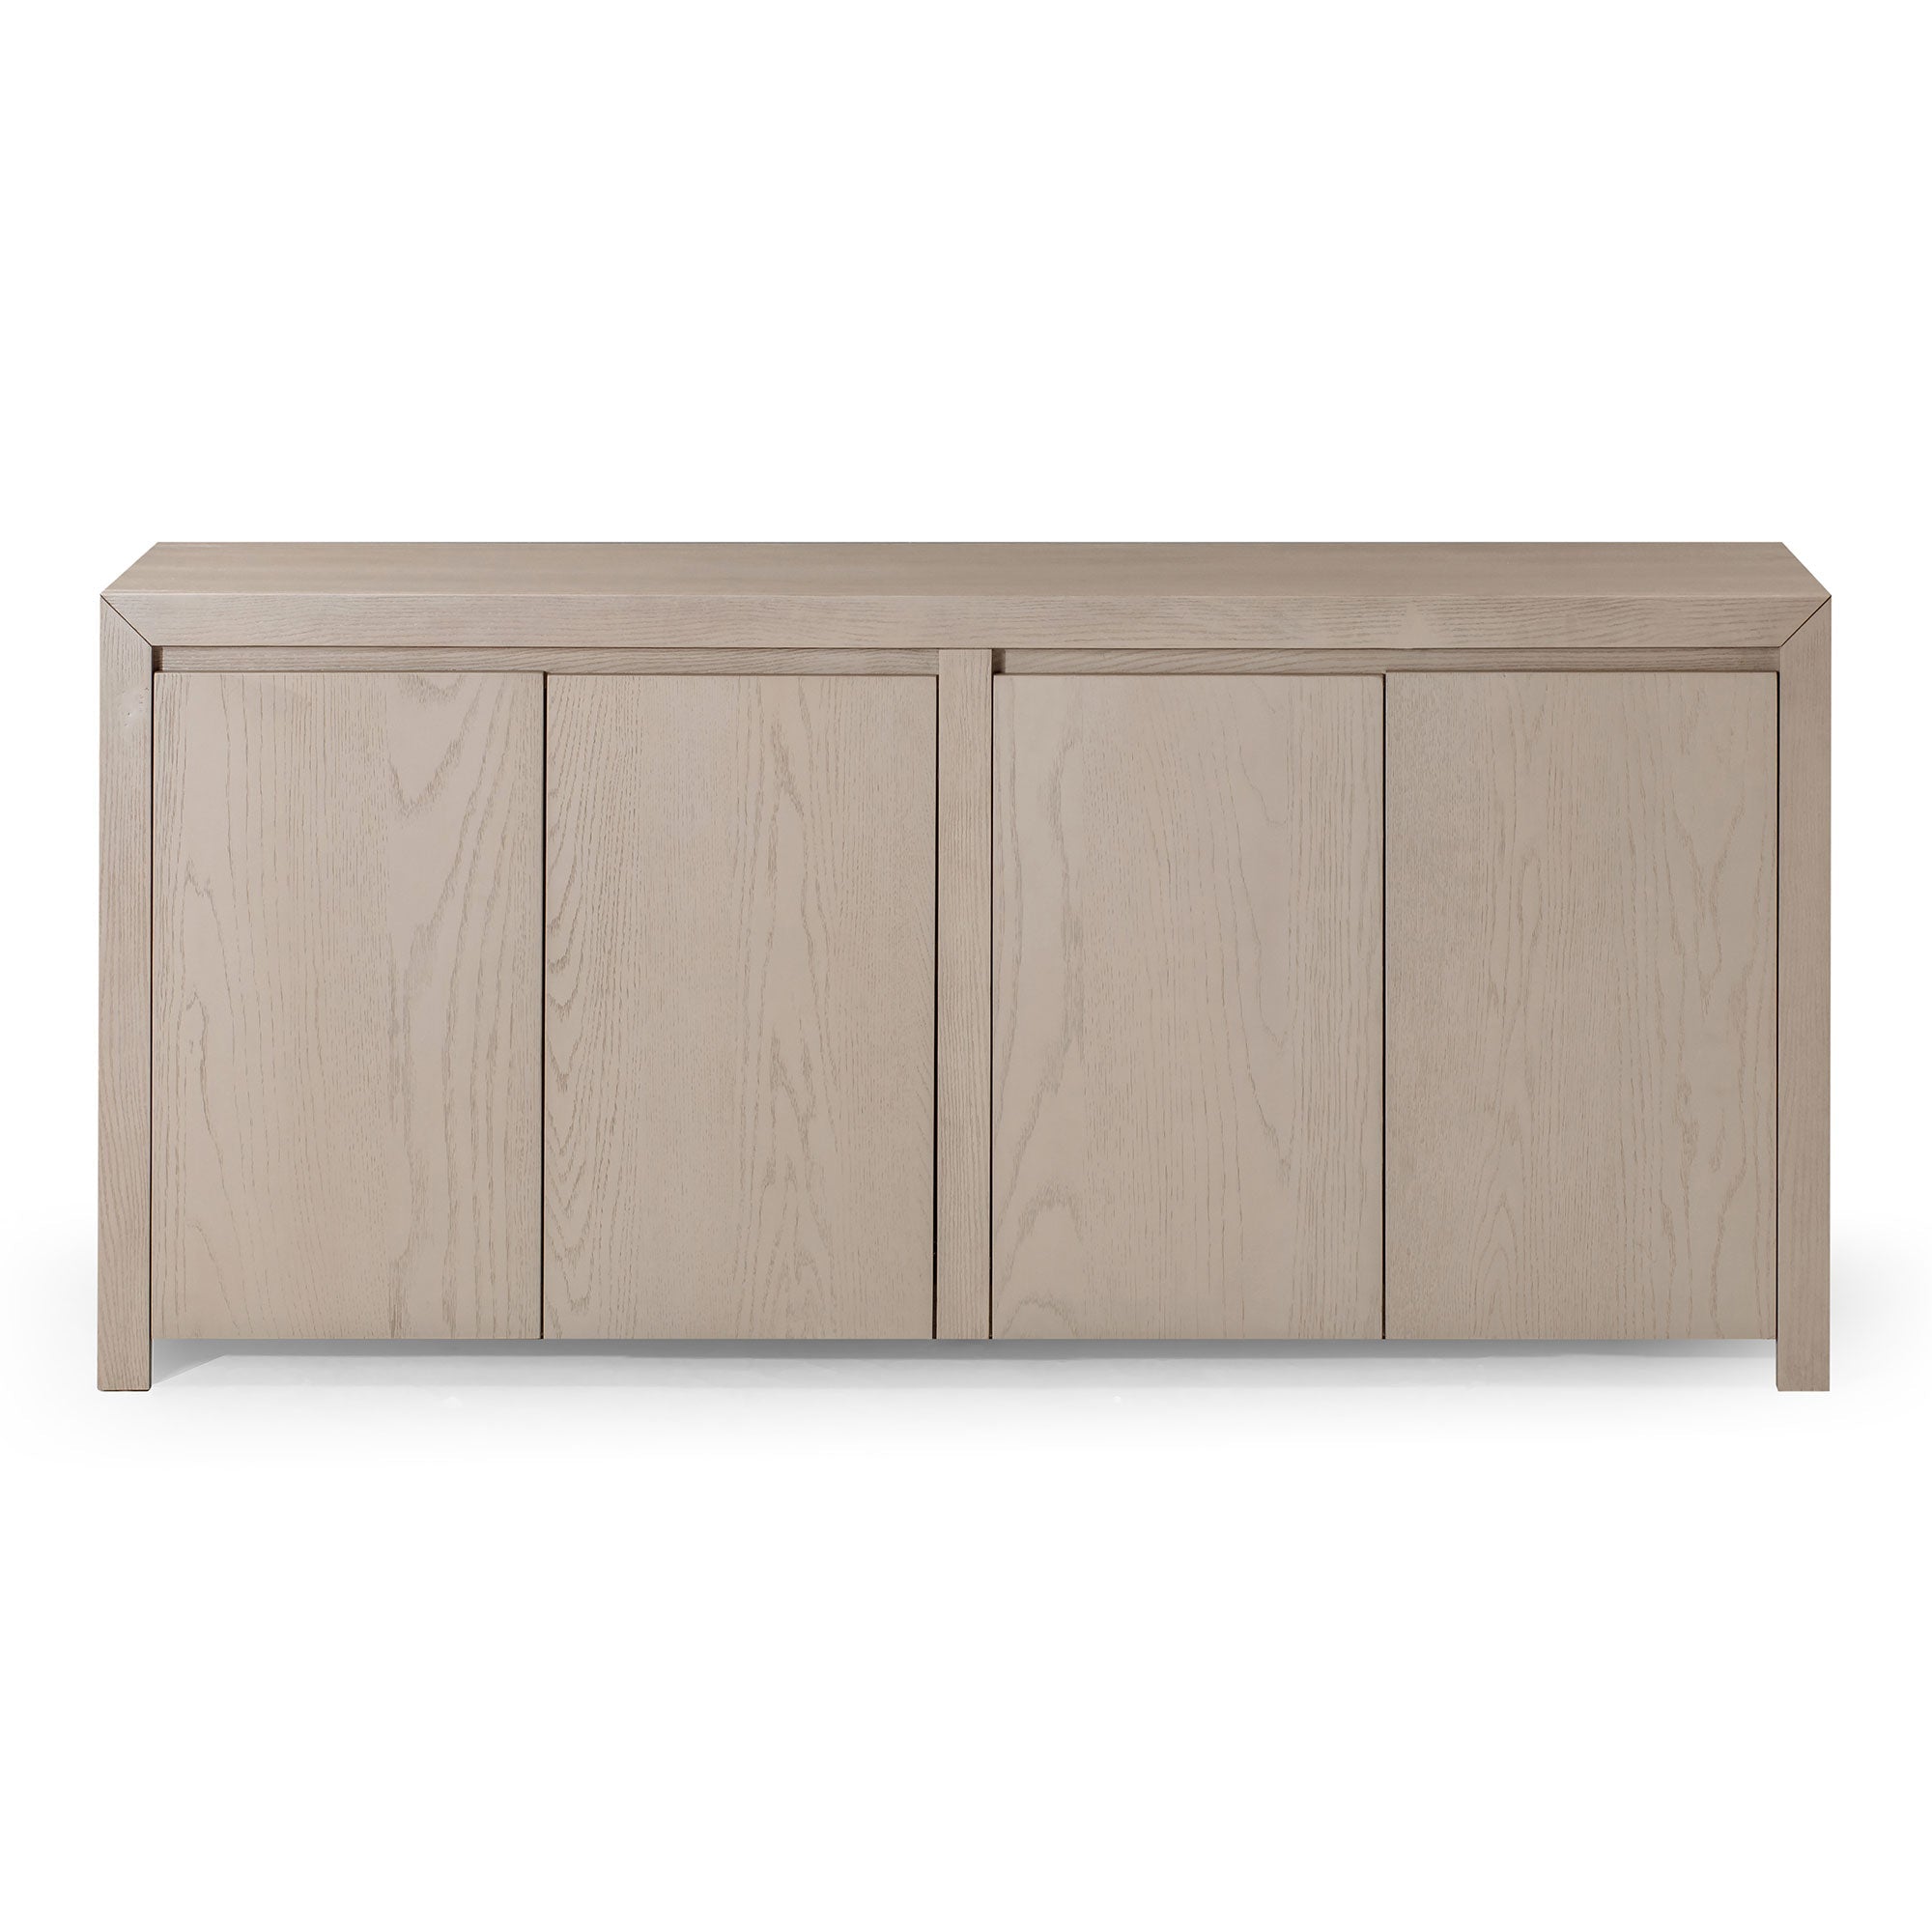 Iris Contemporary Wooden Sideboard in Refined White Finish in Cabinets by Maven Lane